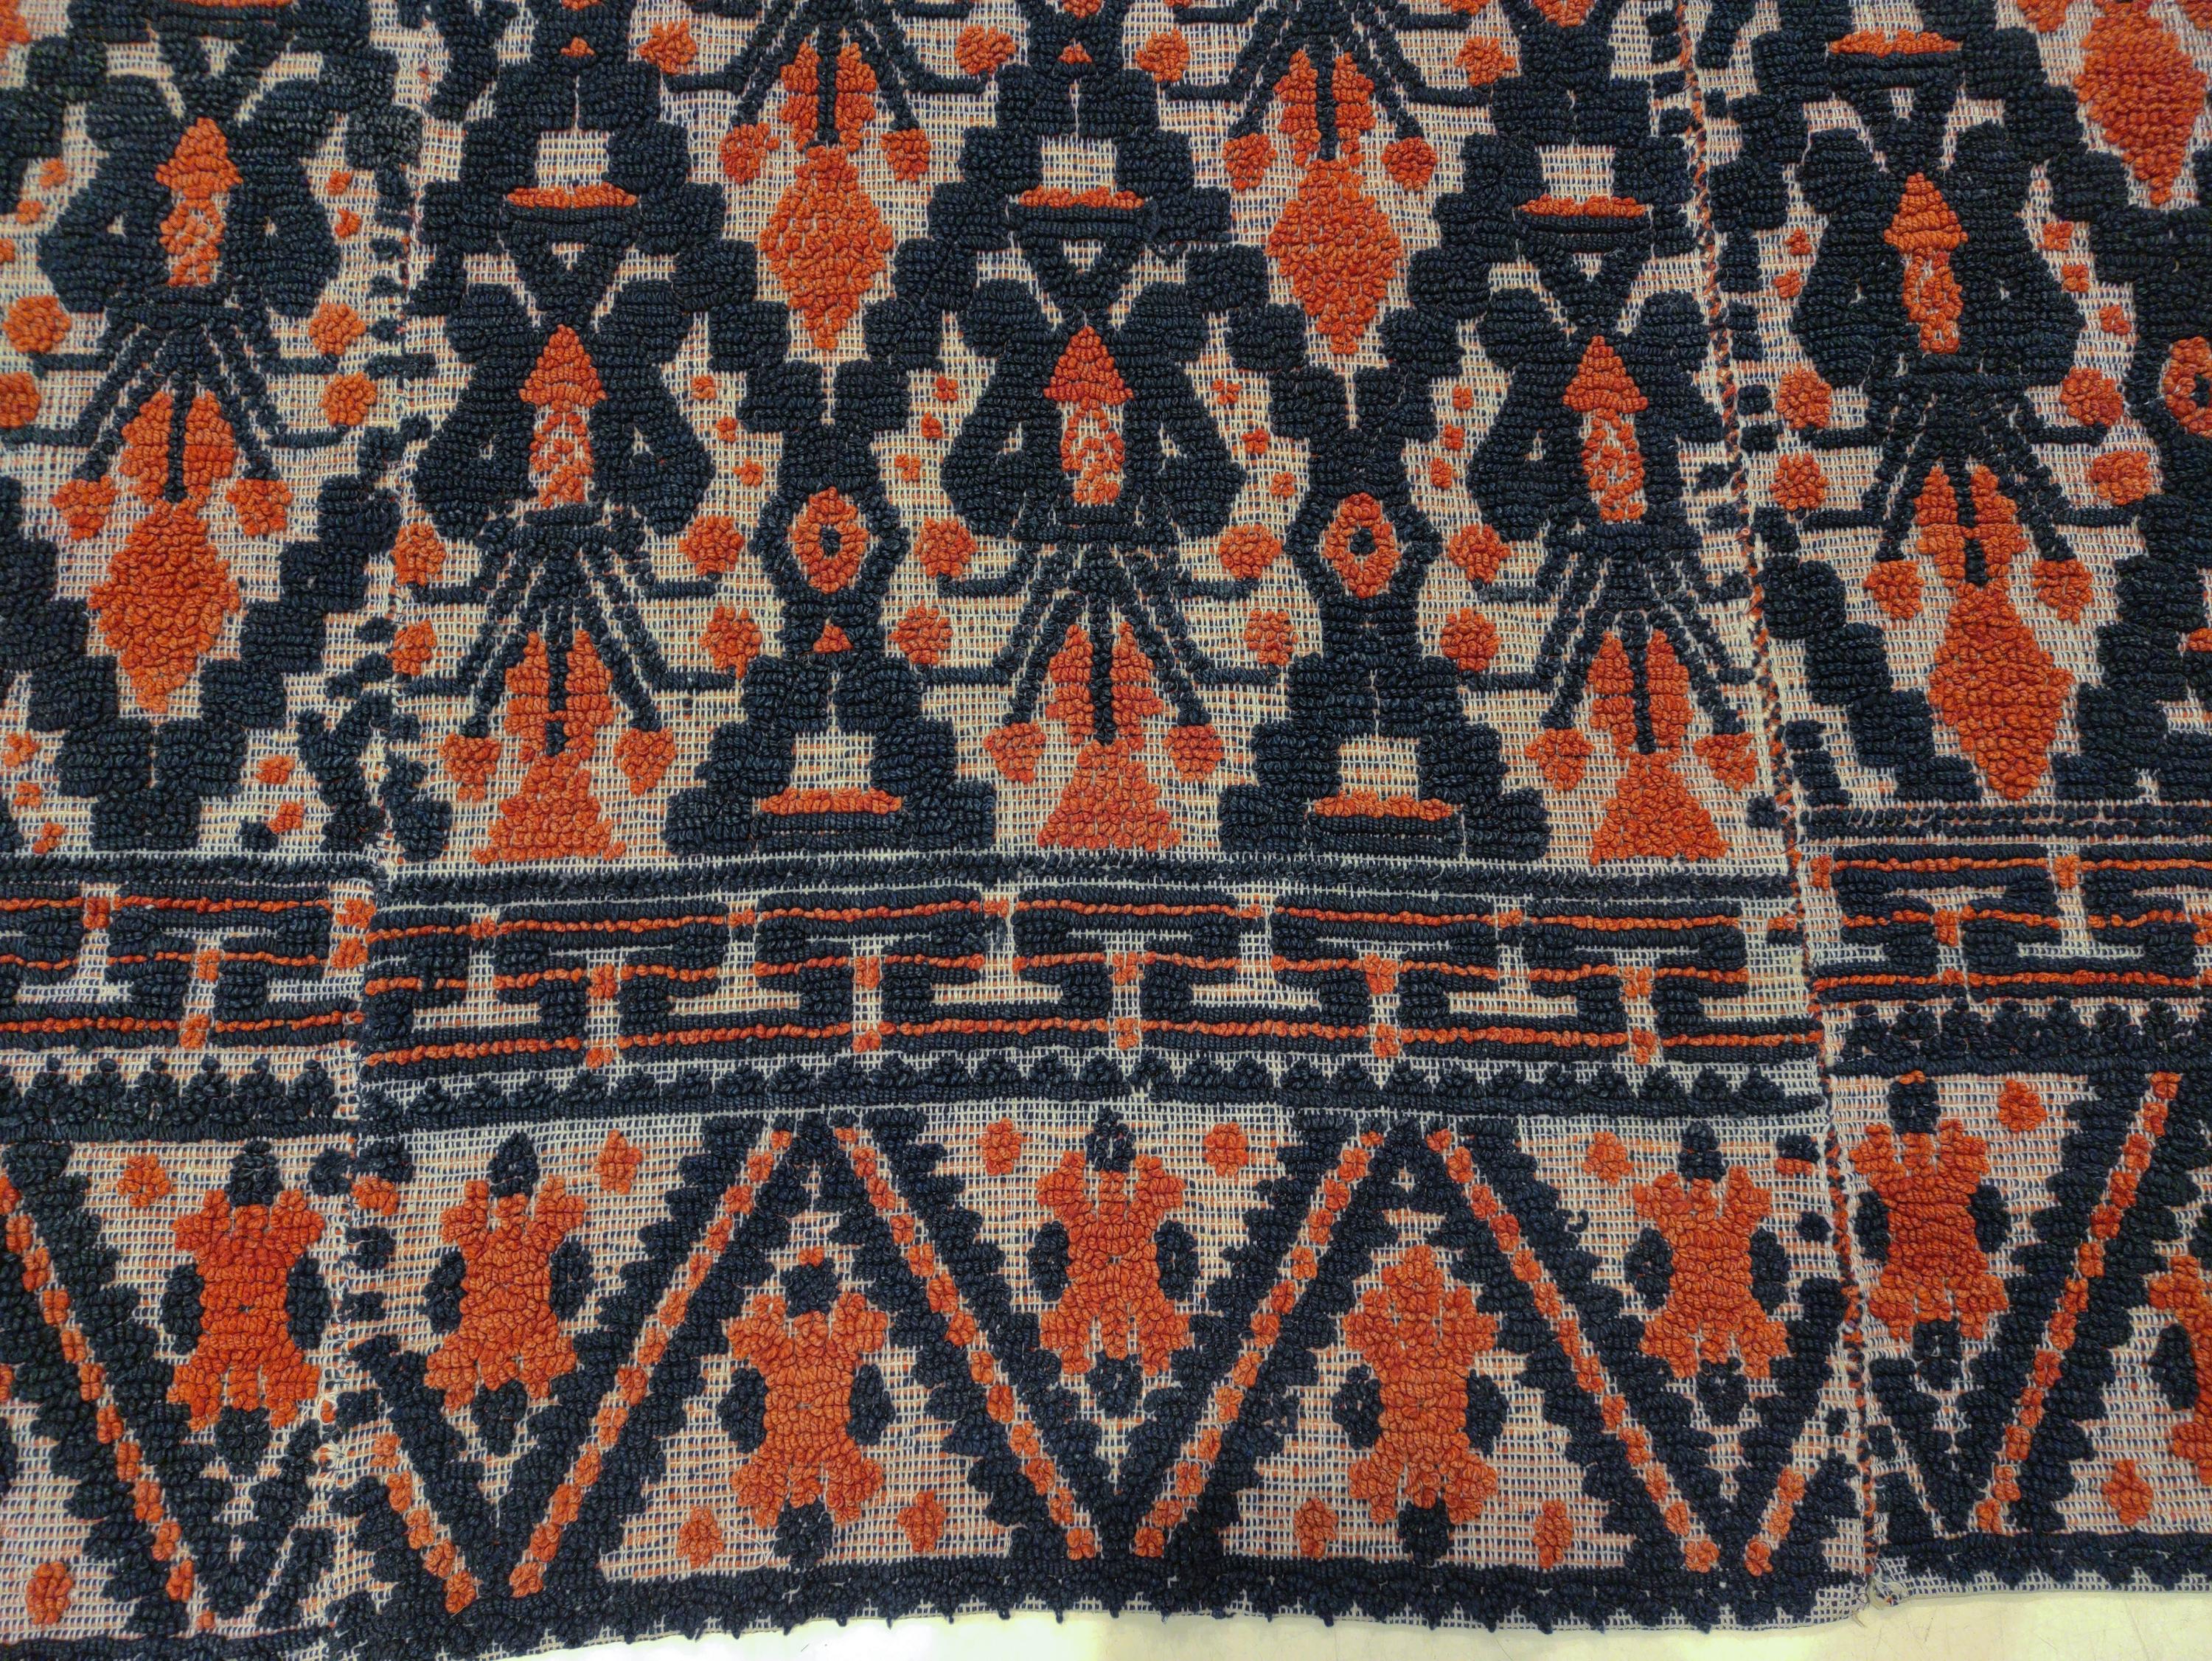 Wool Antique Alpujarra Spanish Textured Rug Signed and Dated 1891 For Sale